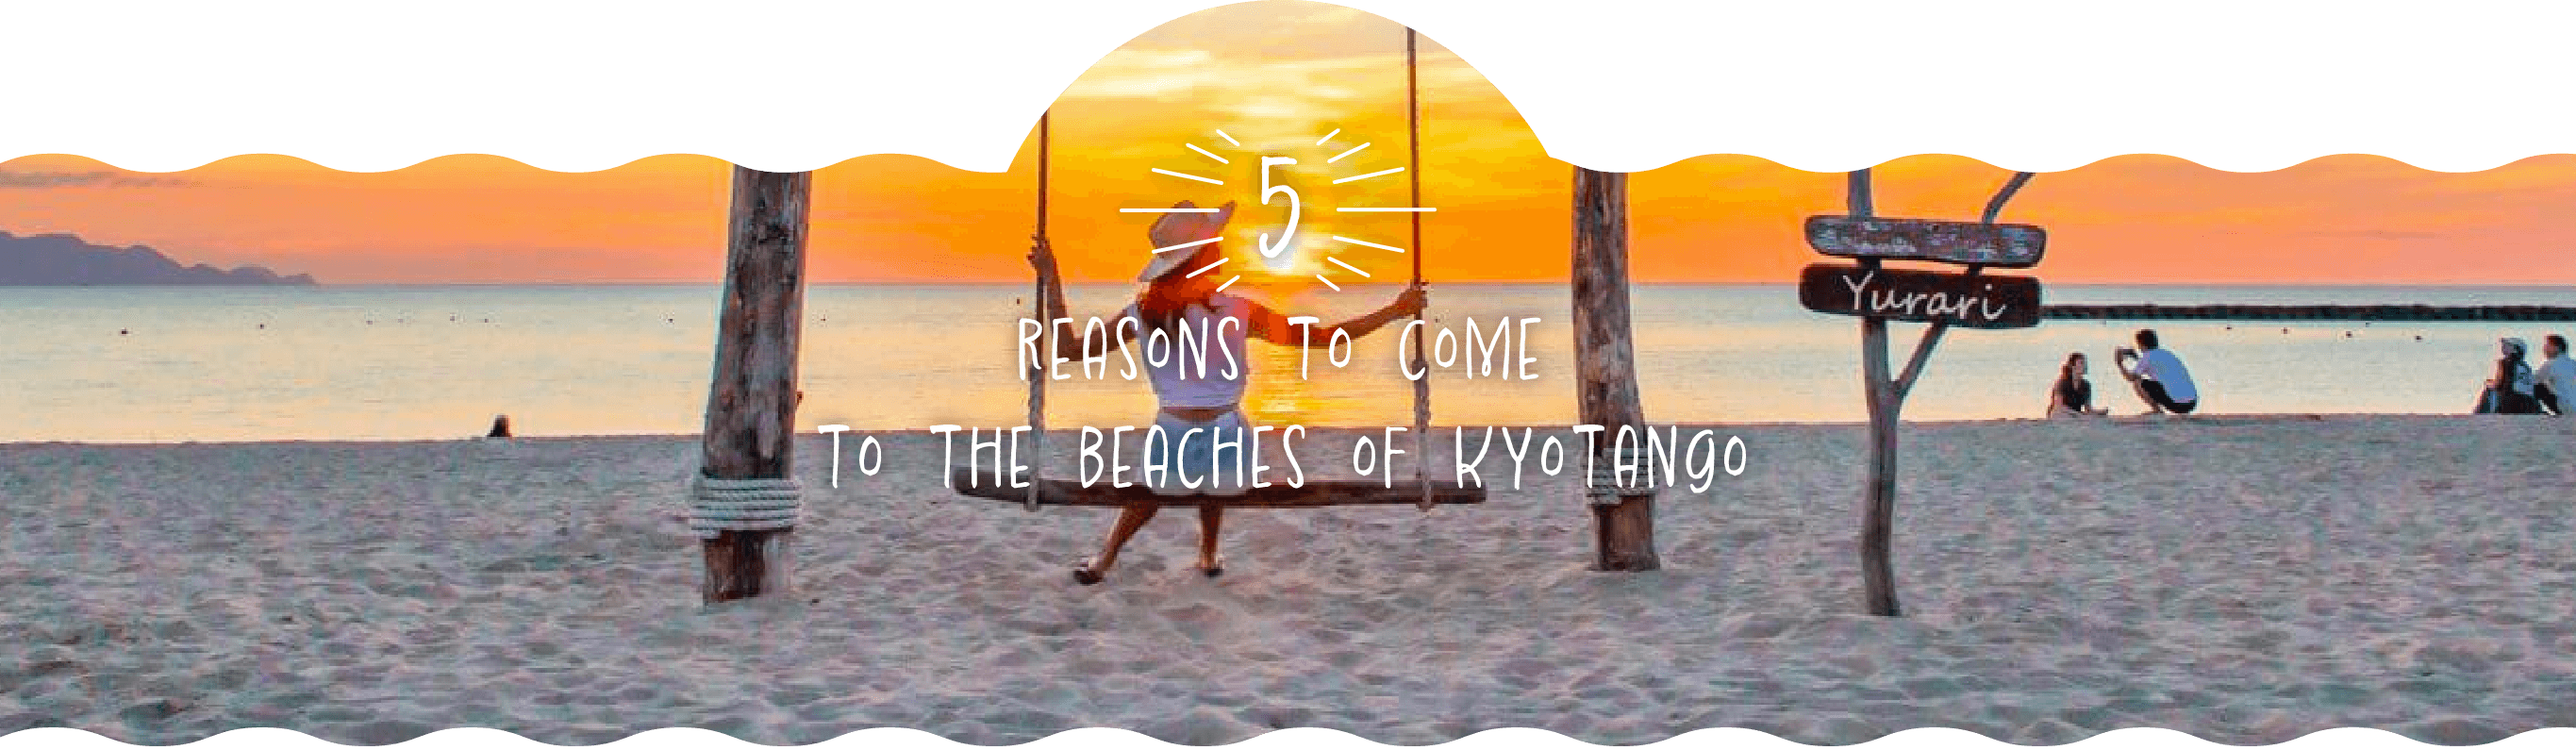 Reasons to come to the beaches of Kyotango